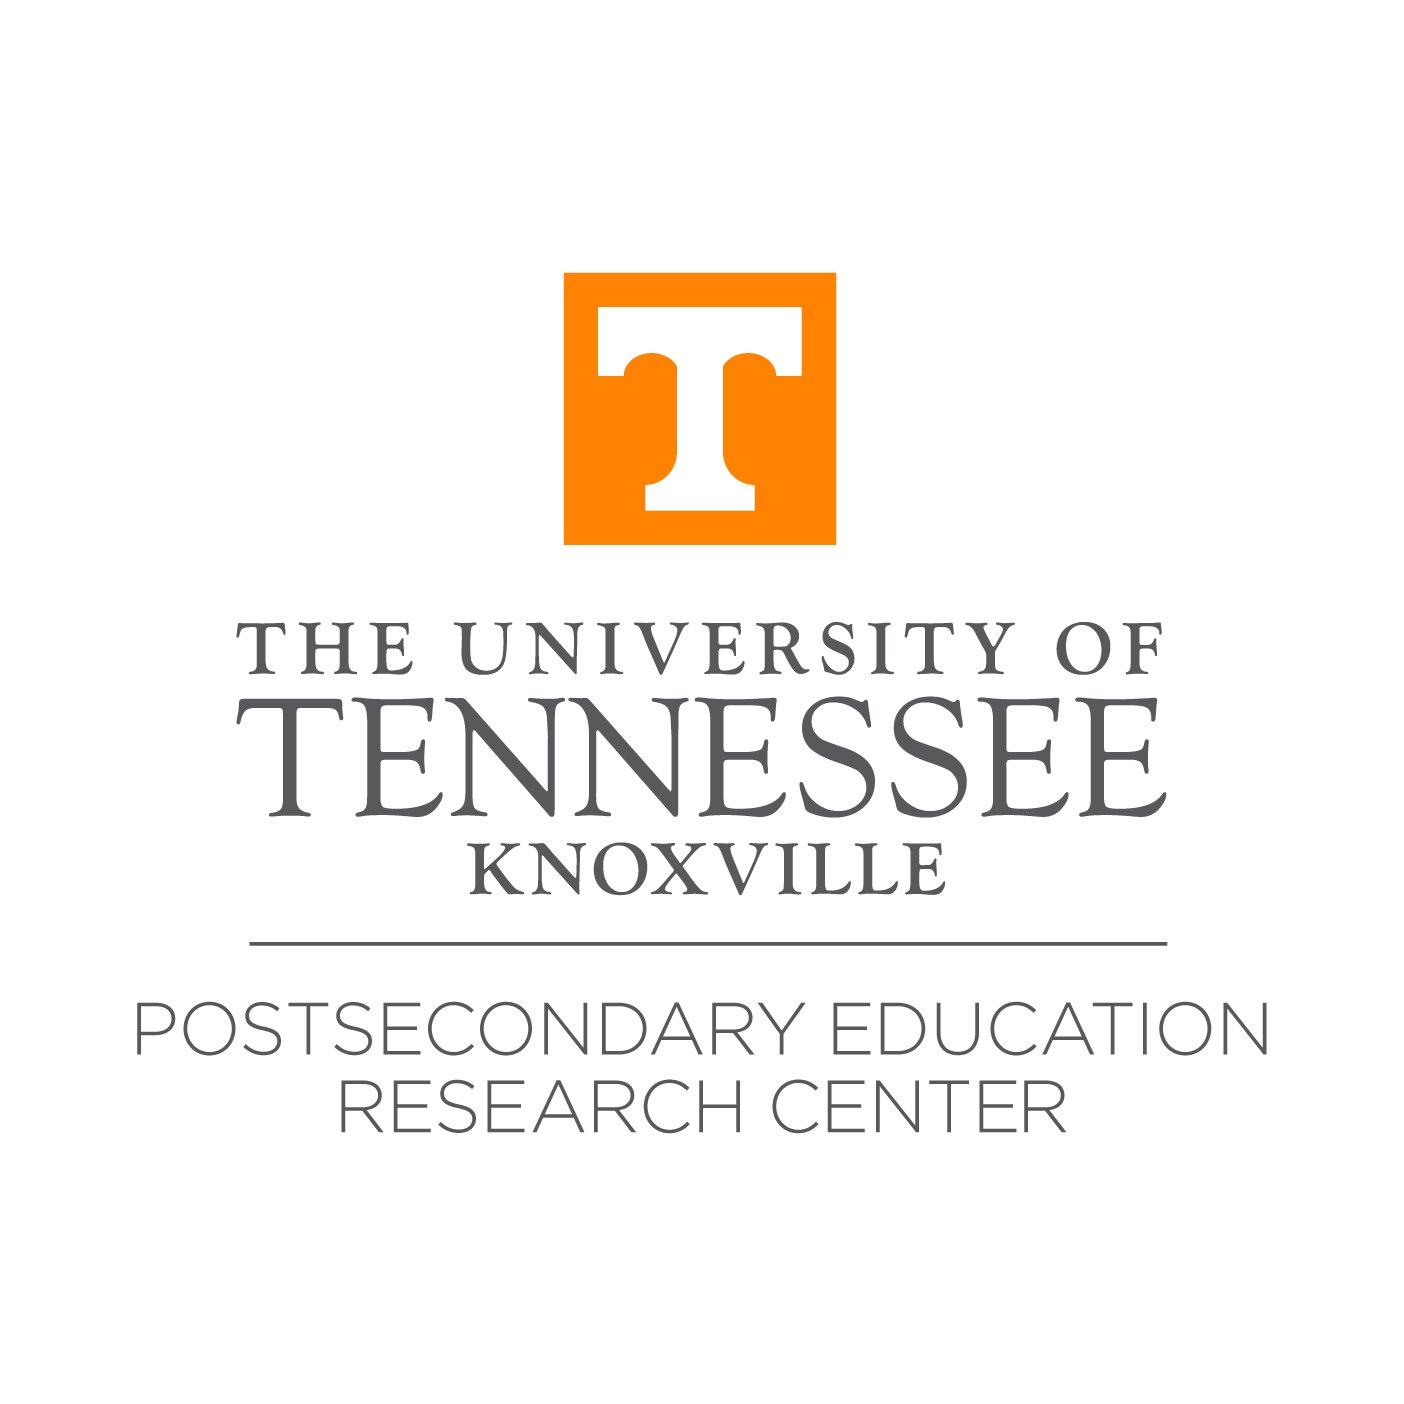 The Postsecondary Education Research Center (PERC) identifies, conducts, and coordinates research to enhance higher education across Tennessee and the nation.